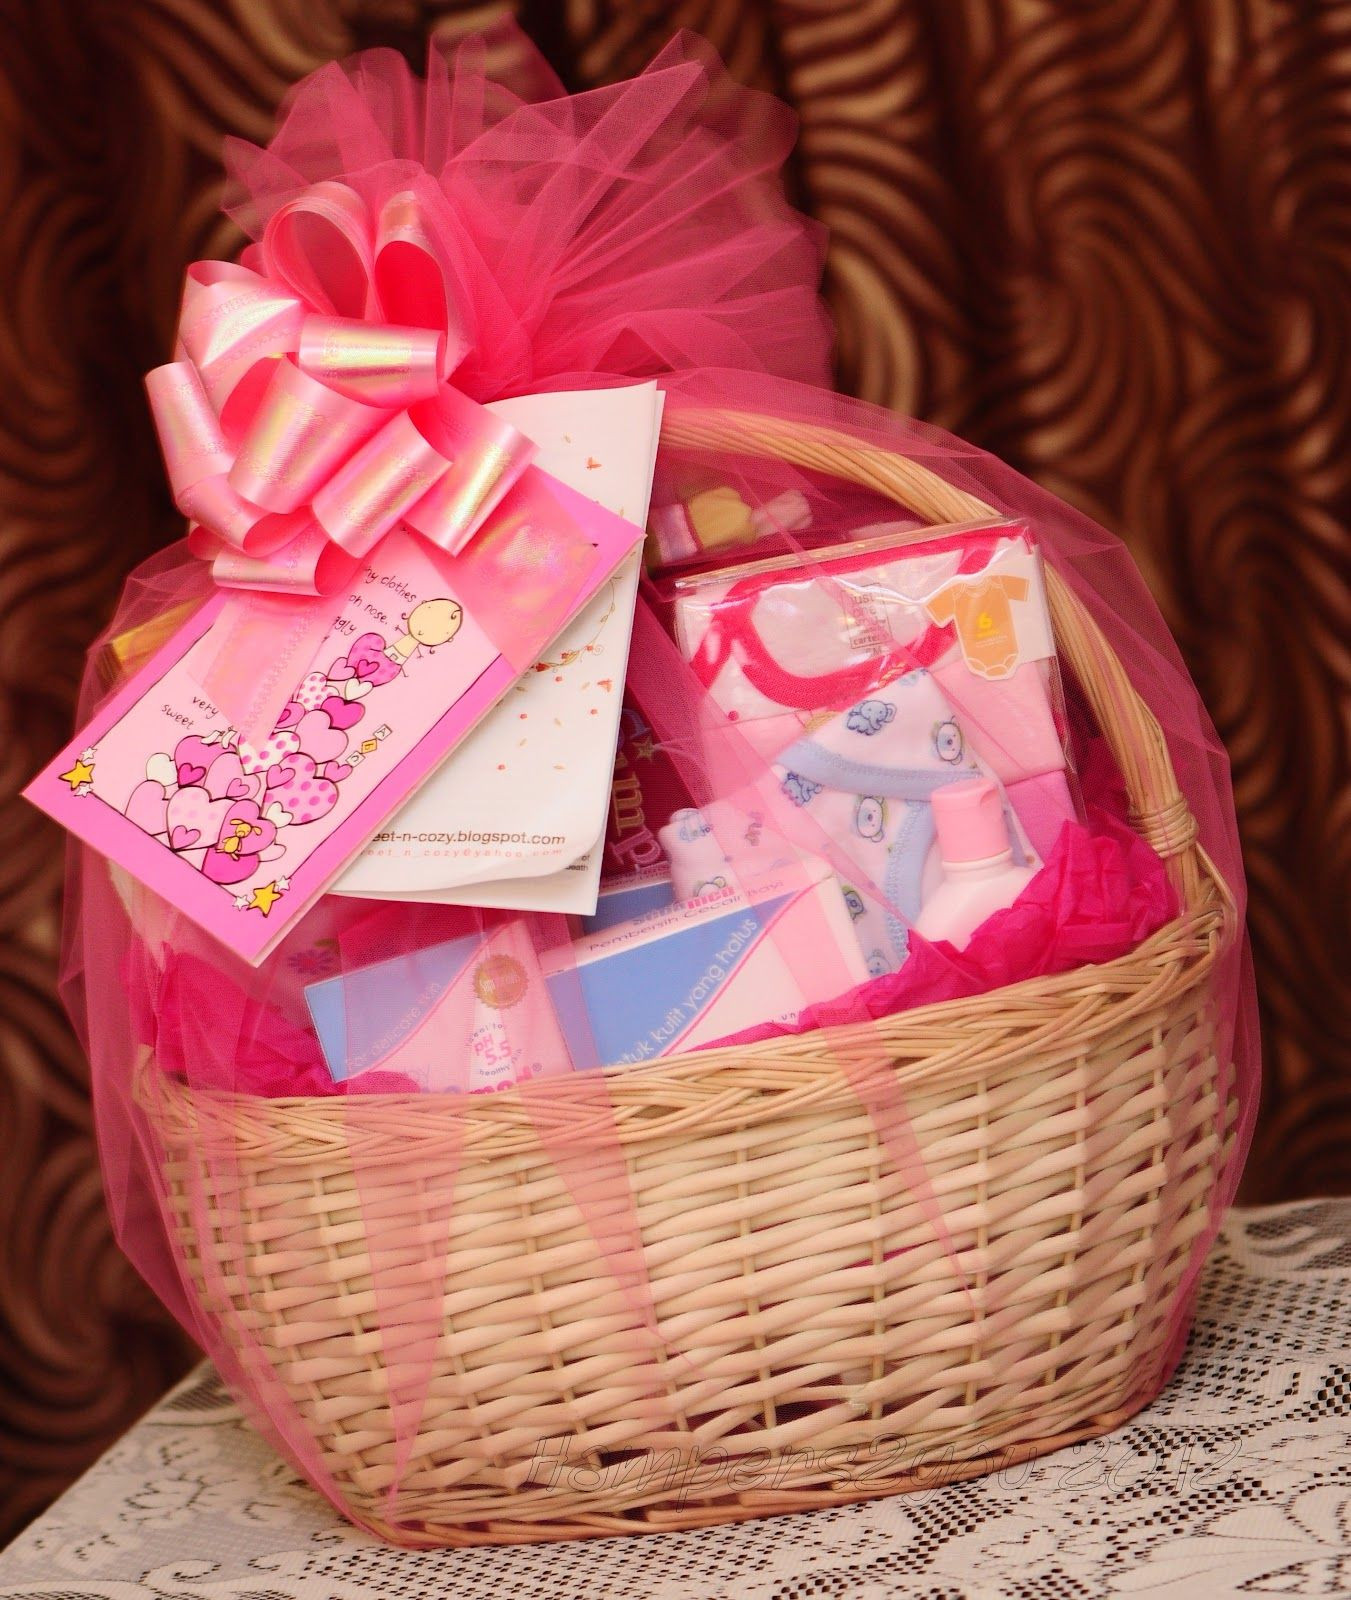 New Baby Gift Basket Ideas
 Baby Gift Baskets